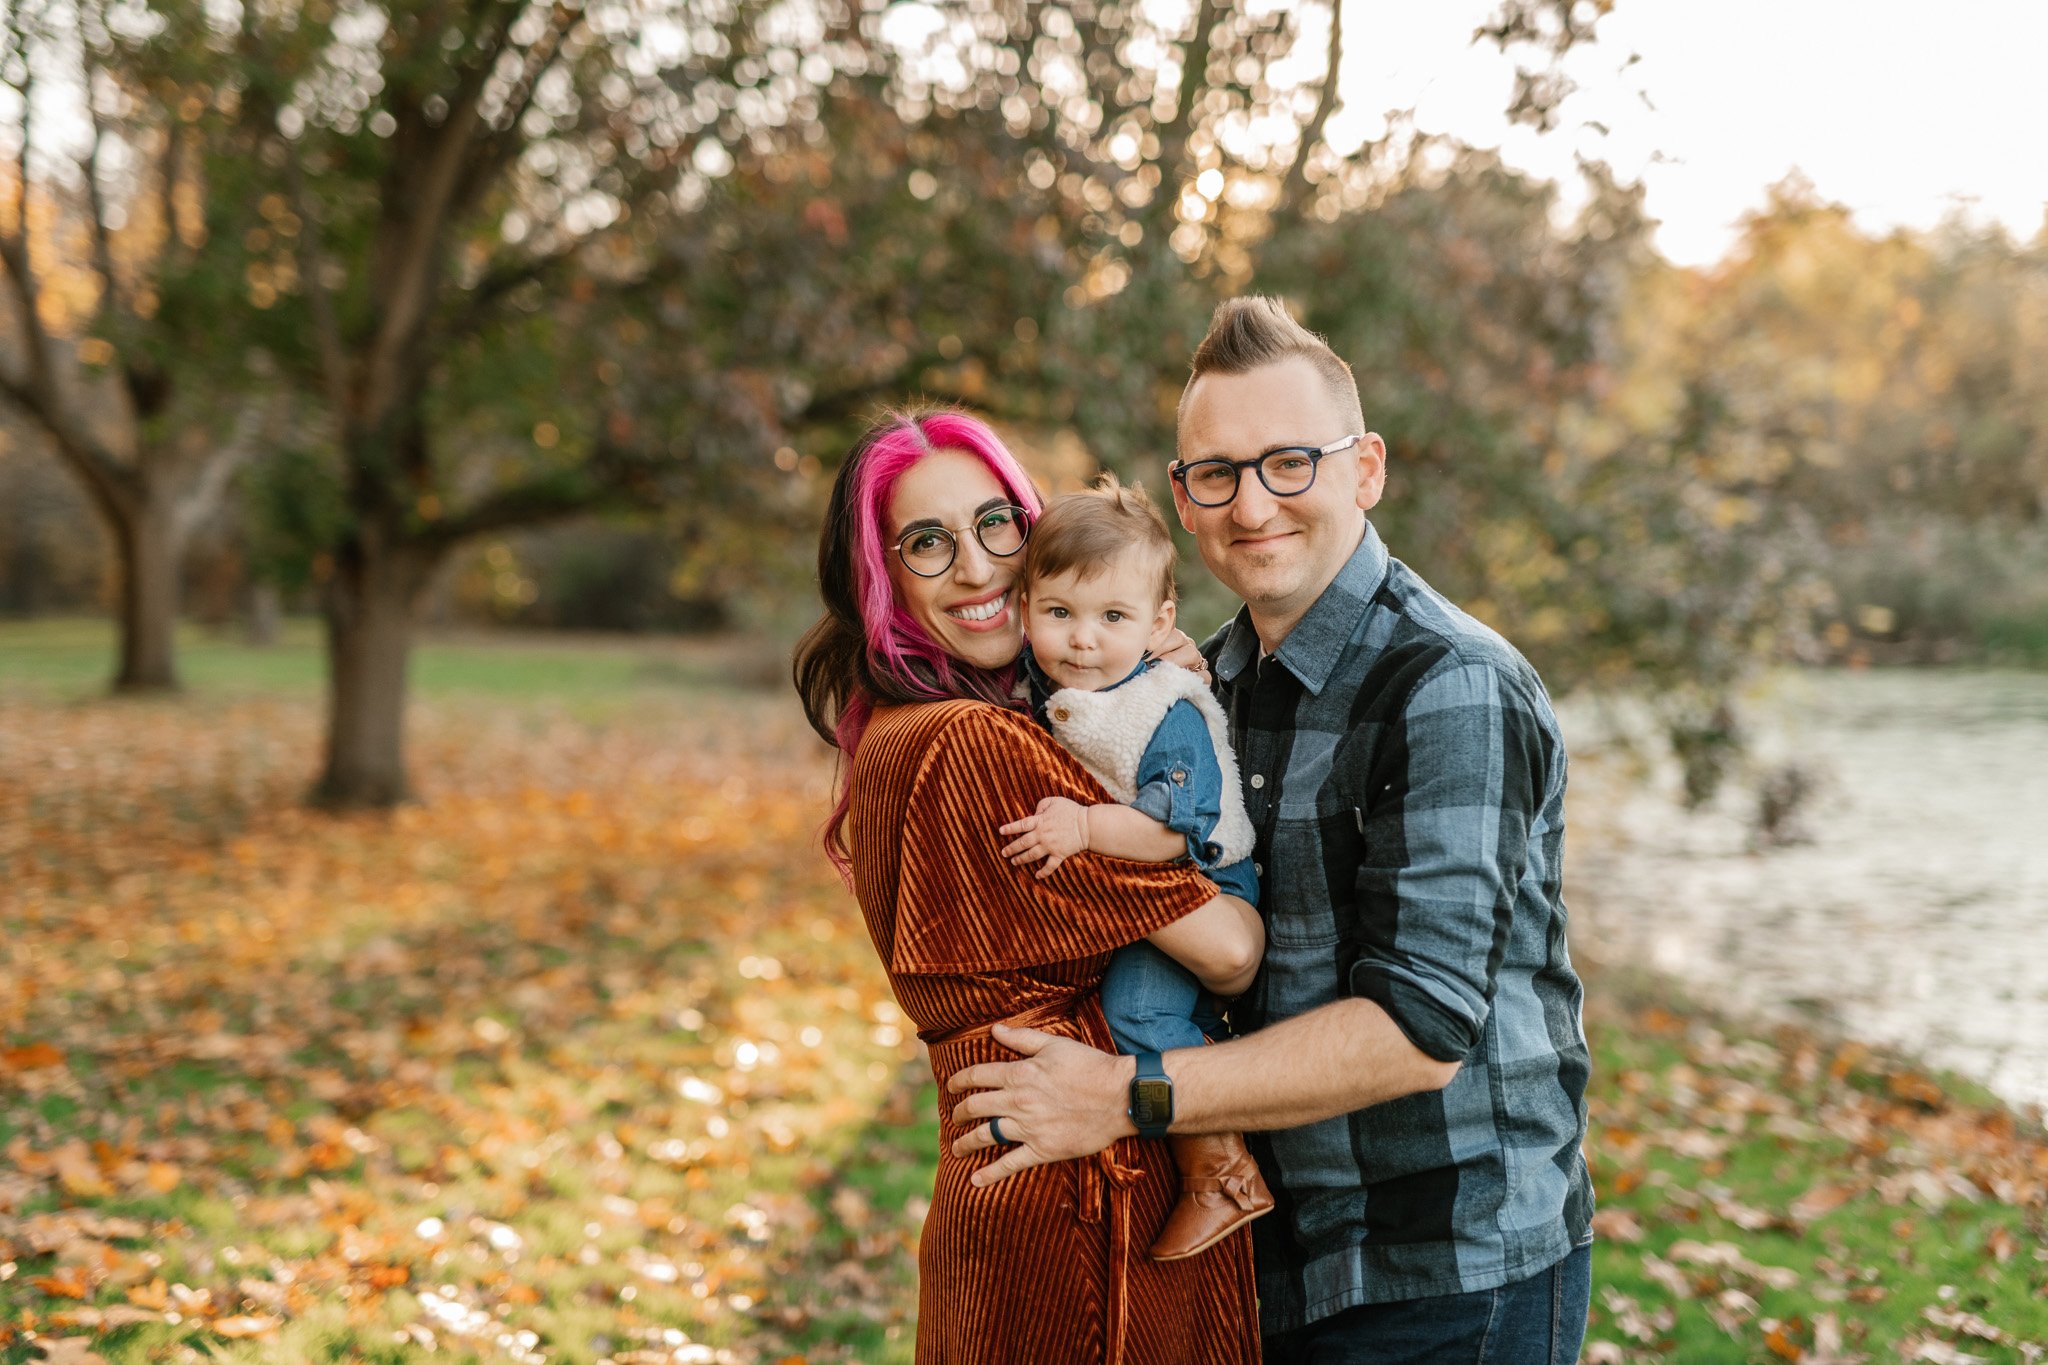  Family portrait with a mother, father, and baby in the New Jersey fall leaves by Nicole Hawkins Photography. family fall NJ NY #NicoleHawkinsPhotography #NicoleHawkinsFamily #fallfamilyphotos #fallphotos #familyphotographerNJ #NJfallfamilypics 